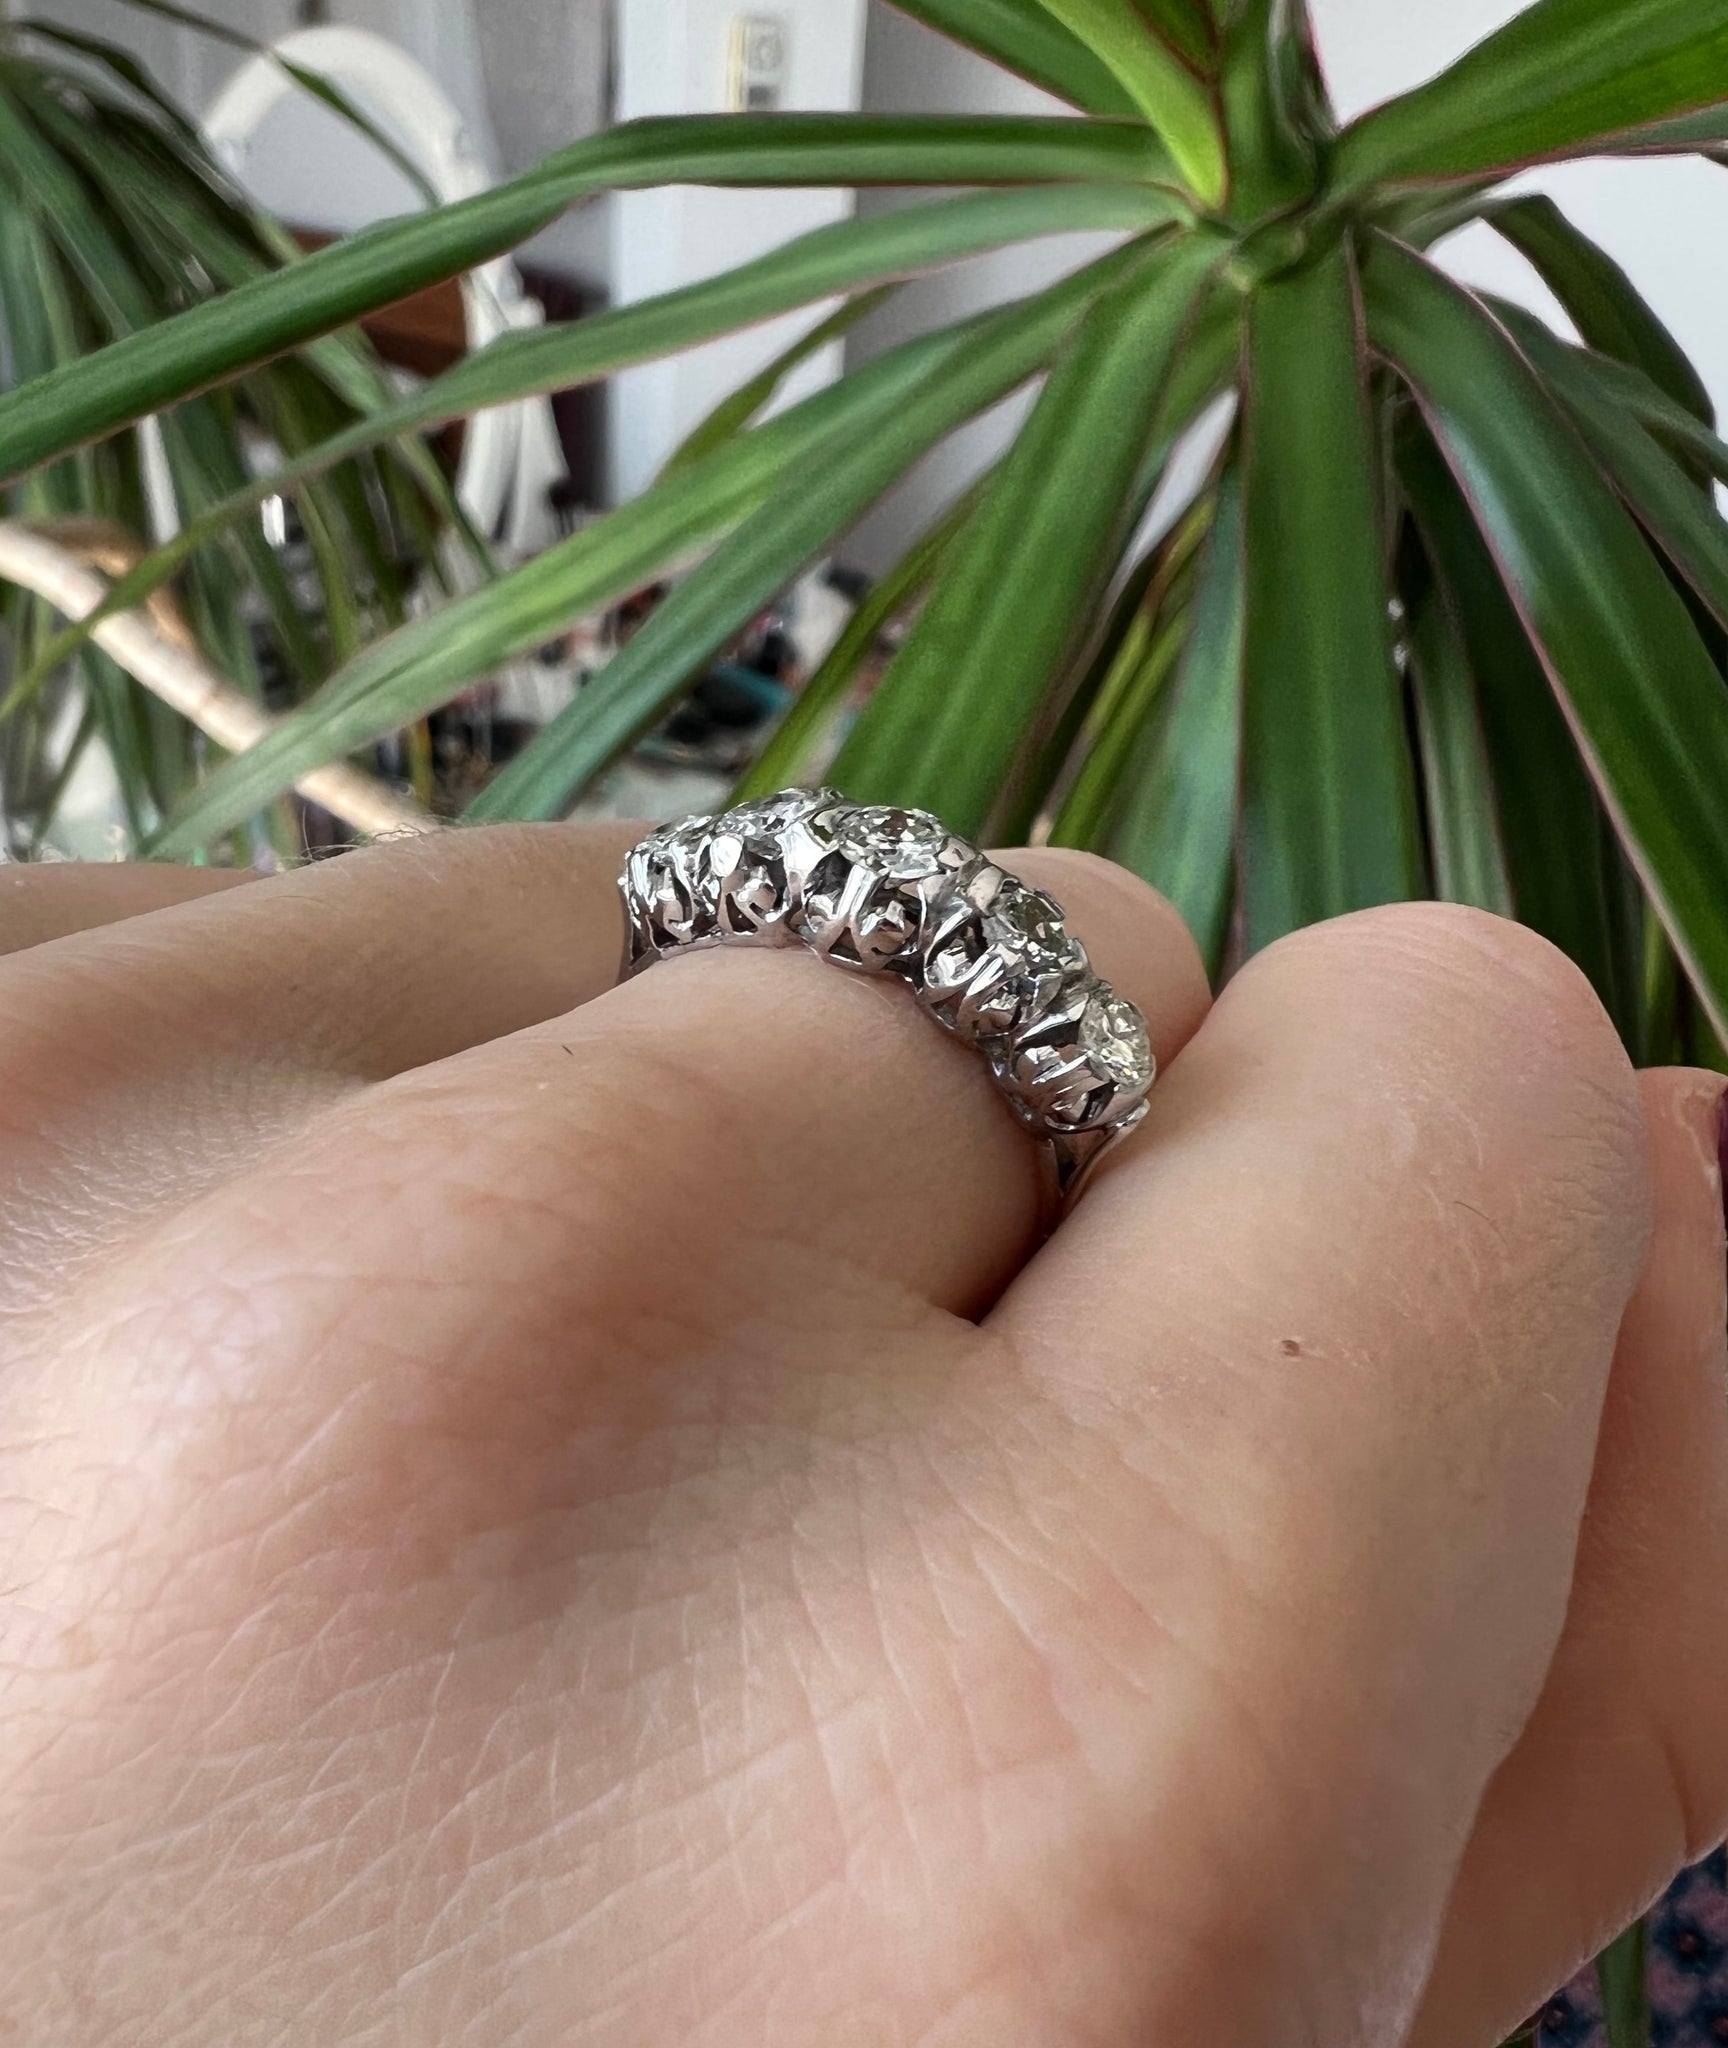 Lico Jewelry Montreal - Vintage 18k diamond ring on hand with bent fingers and green plant in background